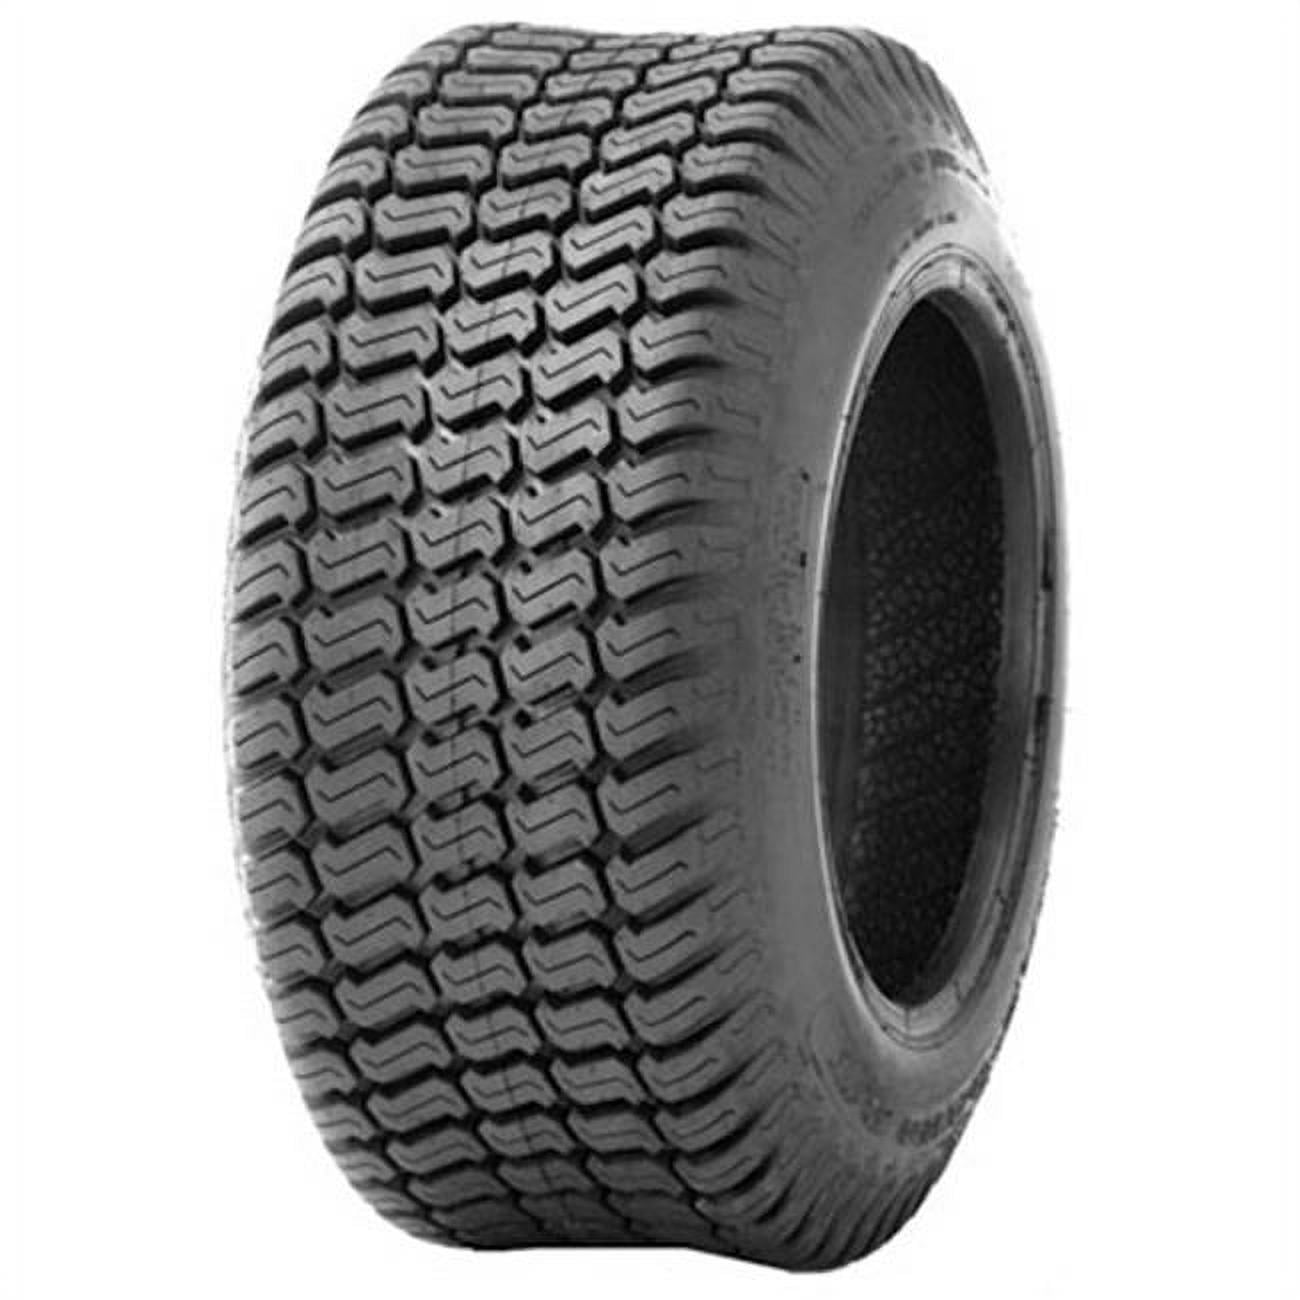 2 11x4.00-5 Tubeless Turf Tires 4 Ply for Lawn Mower Garden Tractor 11x4x5 